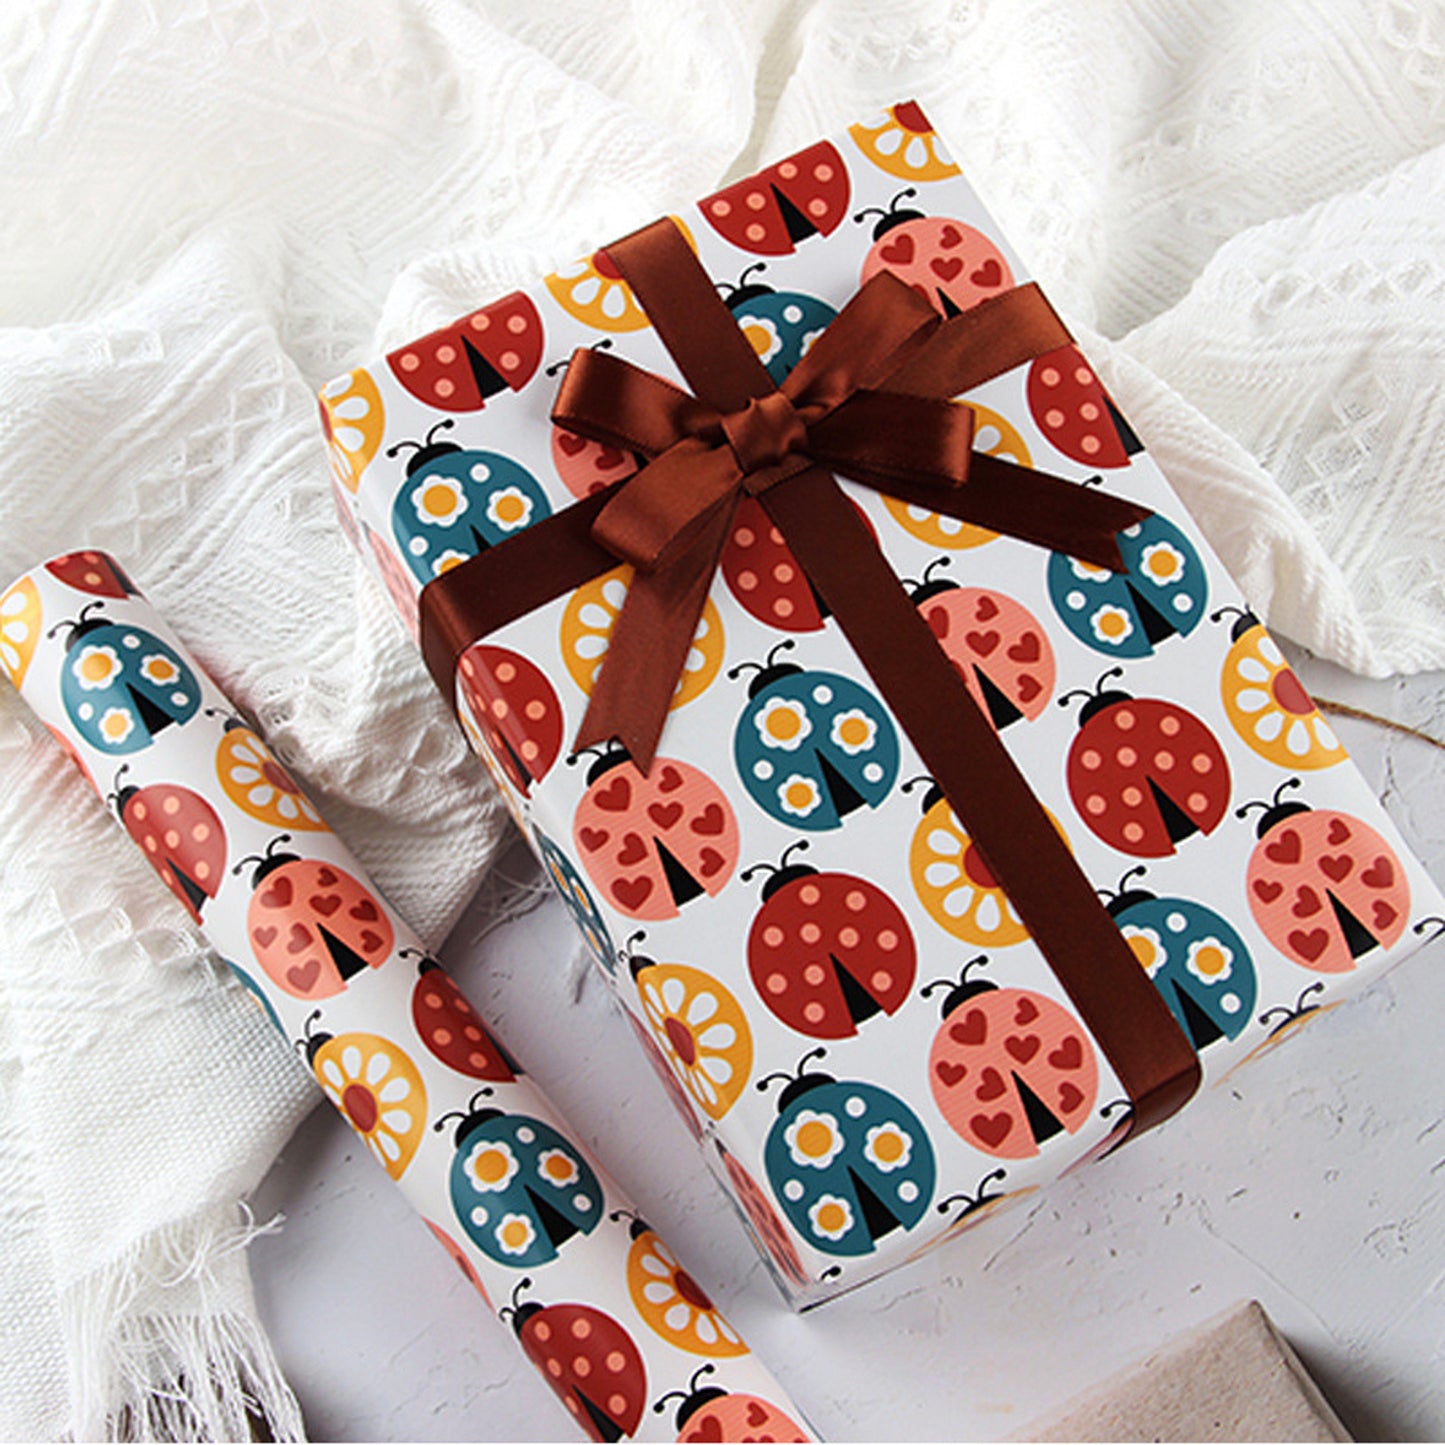 5Pcs Animal Wrapping Paper Sheets